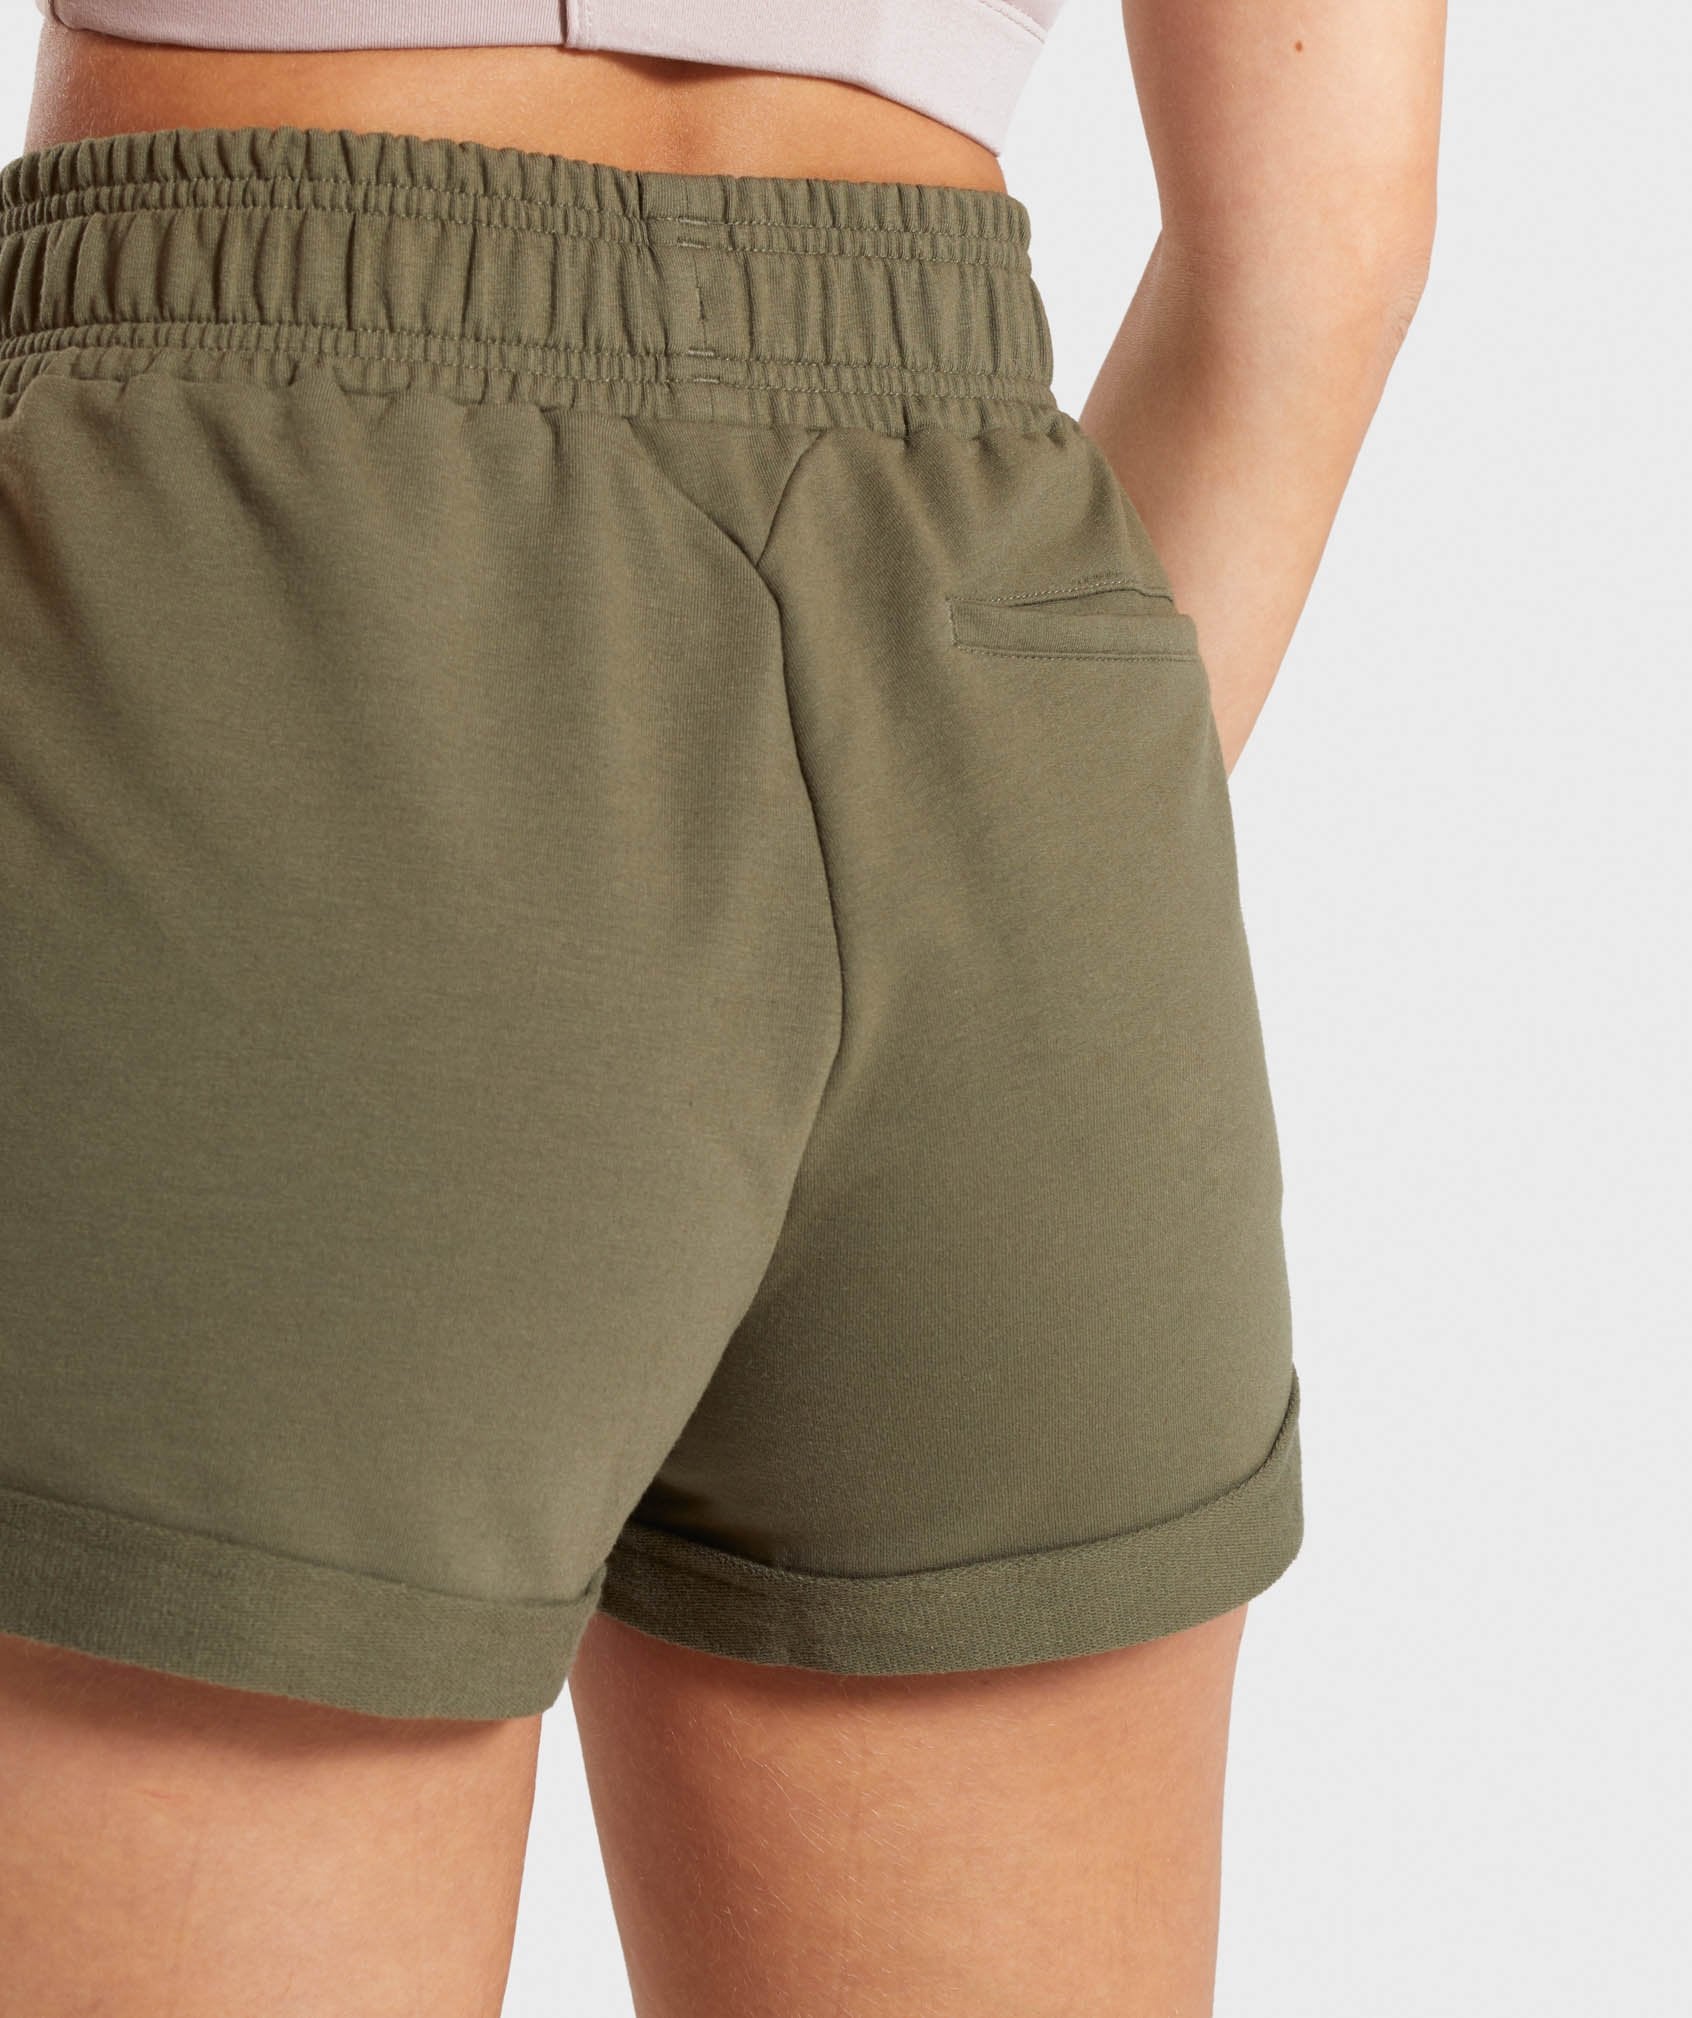 Ark High Waisted Shorts in Khaki - view 5